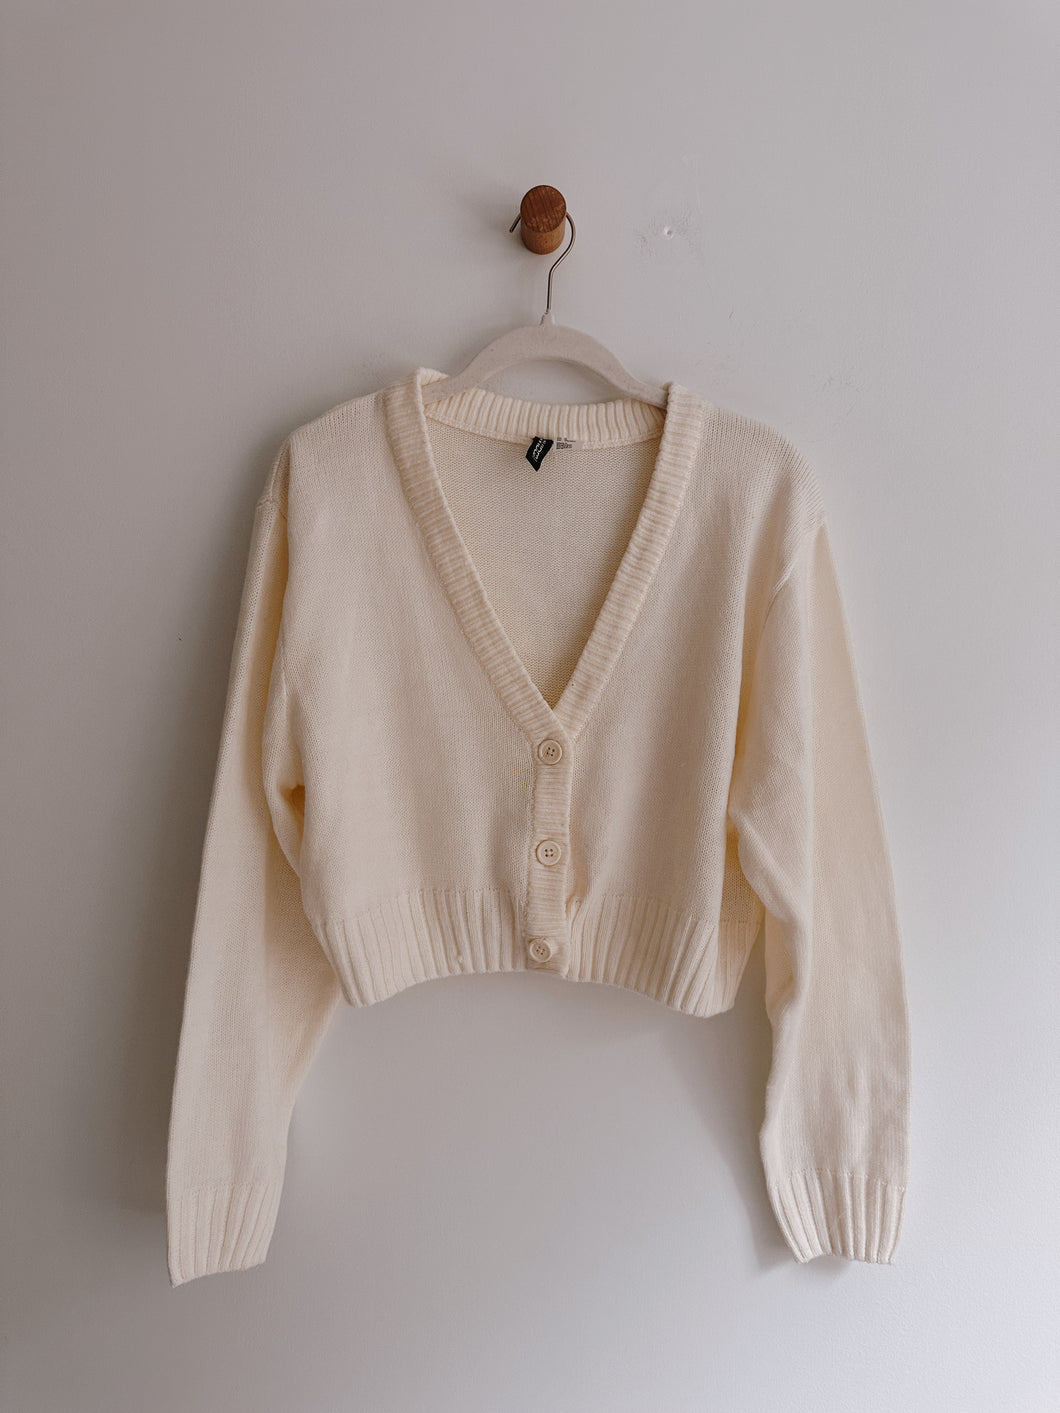 Divided Cropped Off White Cardigan- Size M